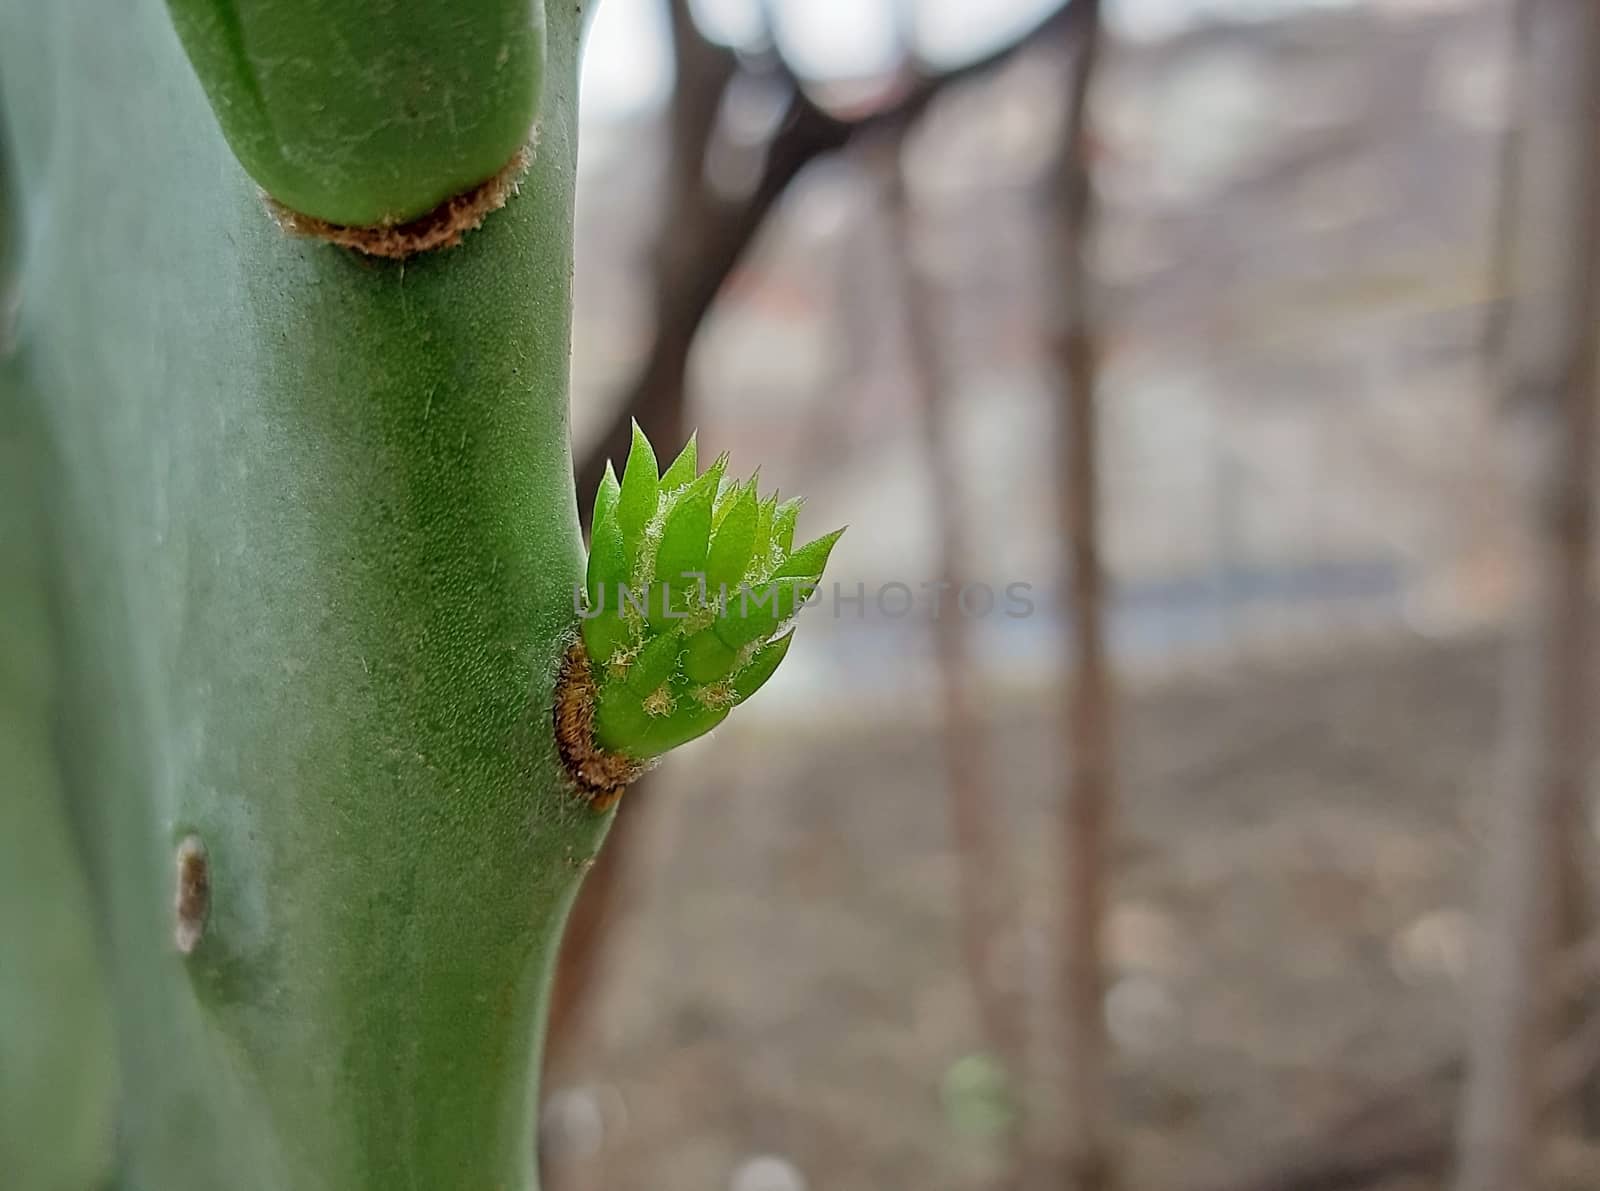 Opuntia cactus new growth in spring close up.